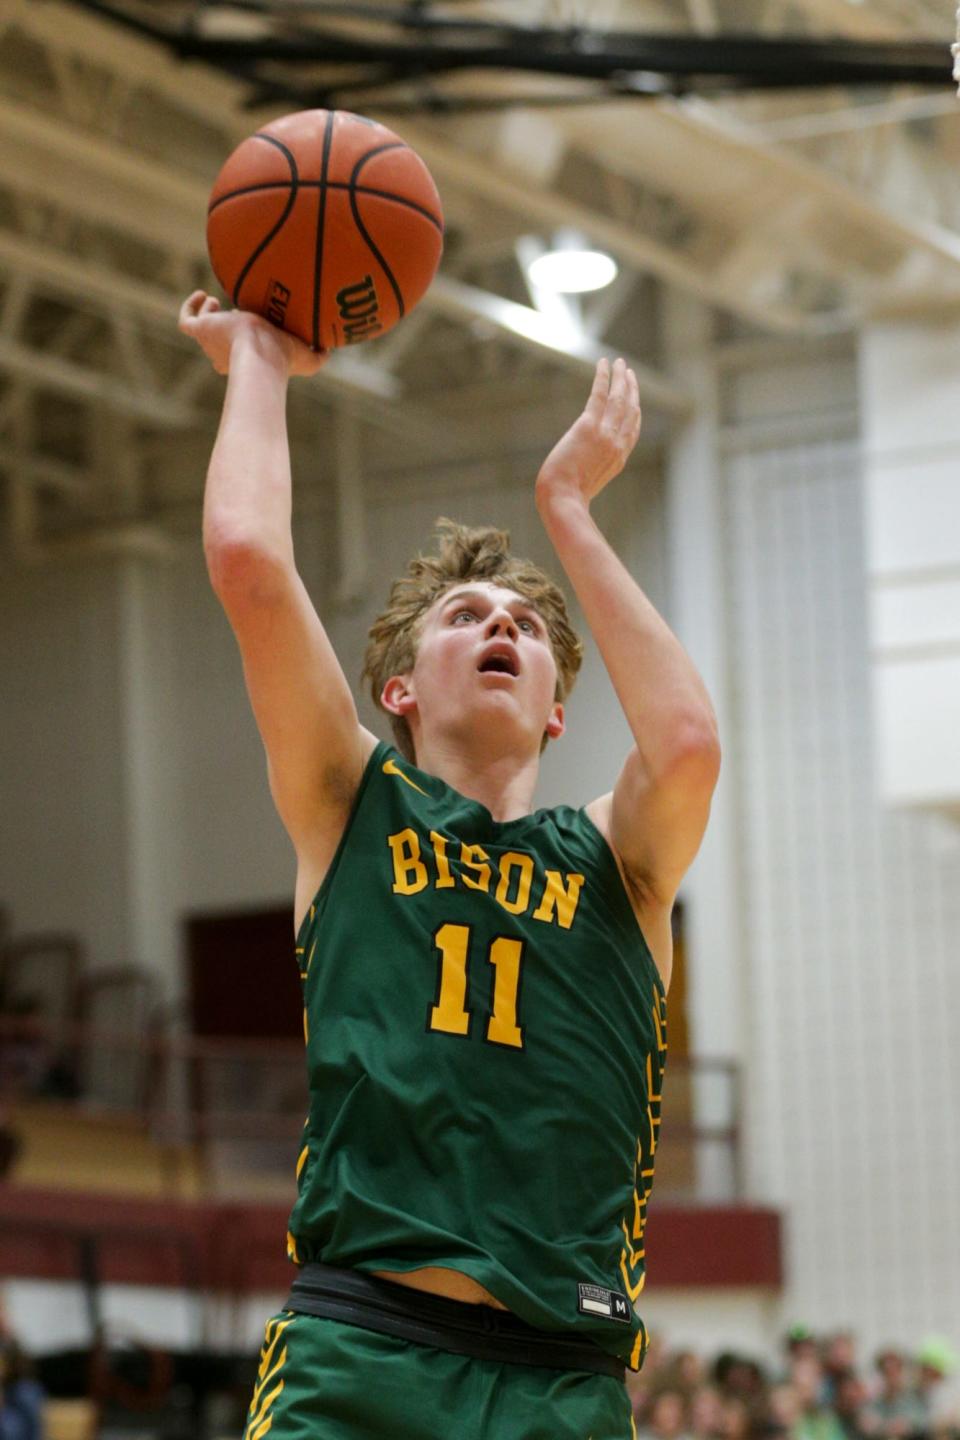 Benton Central's Dawson Brock (11) goes up for a layup during the third quarter of an IHSAA boys basketball game, Tuesday, Feb. 22, 2022 in Lafayette.